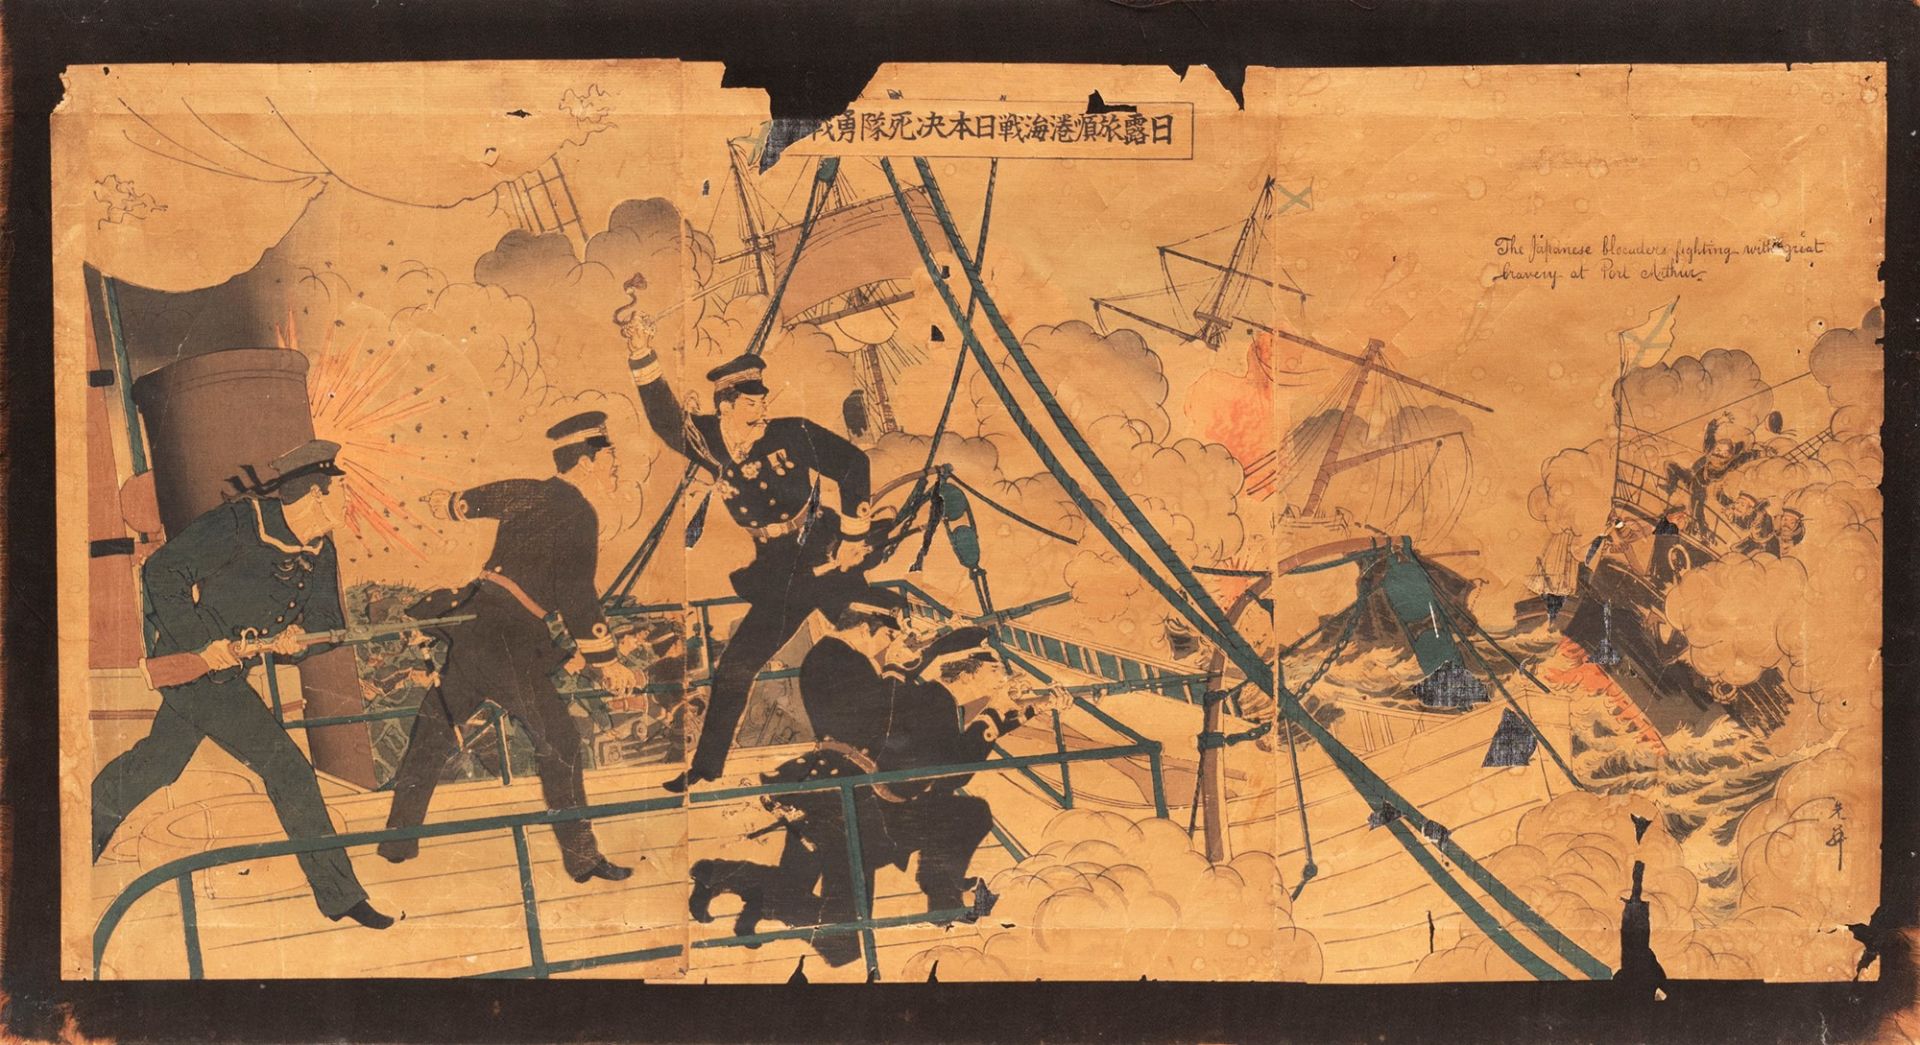 Four prints depicting battle scenes, Japan, early 20th century - Image 7 of 8